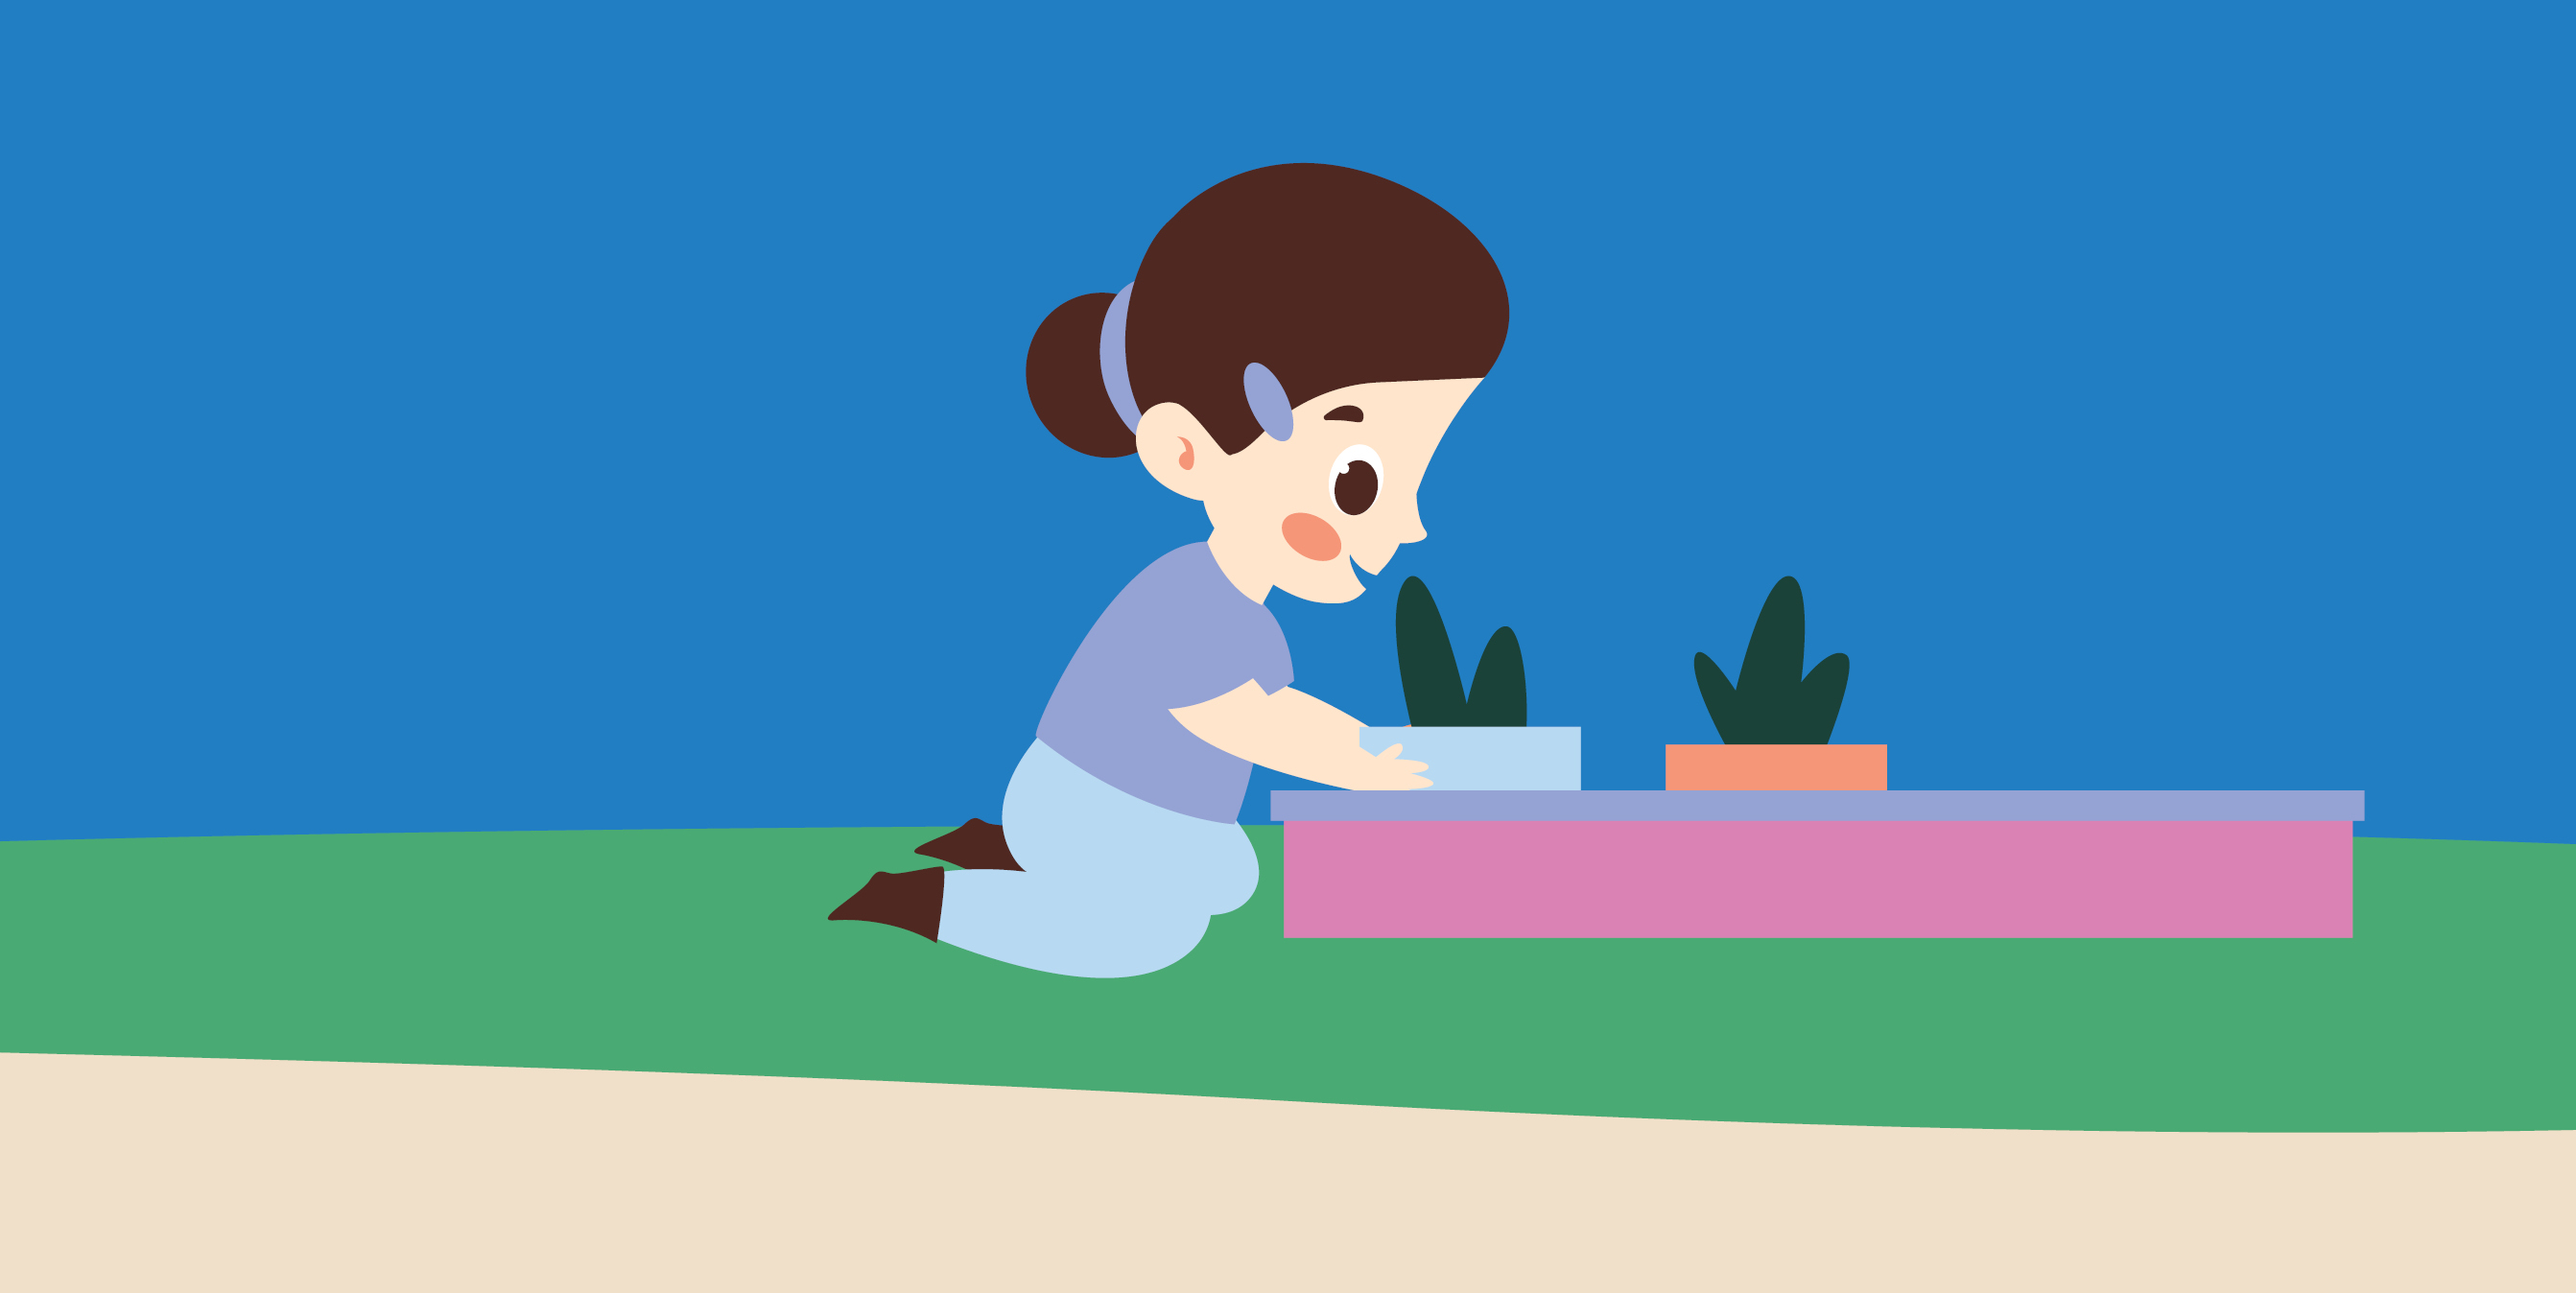 Iconography of a small child kneeling in front of a raised garden.